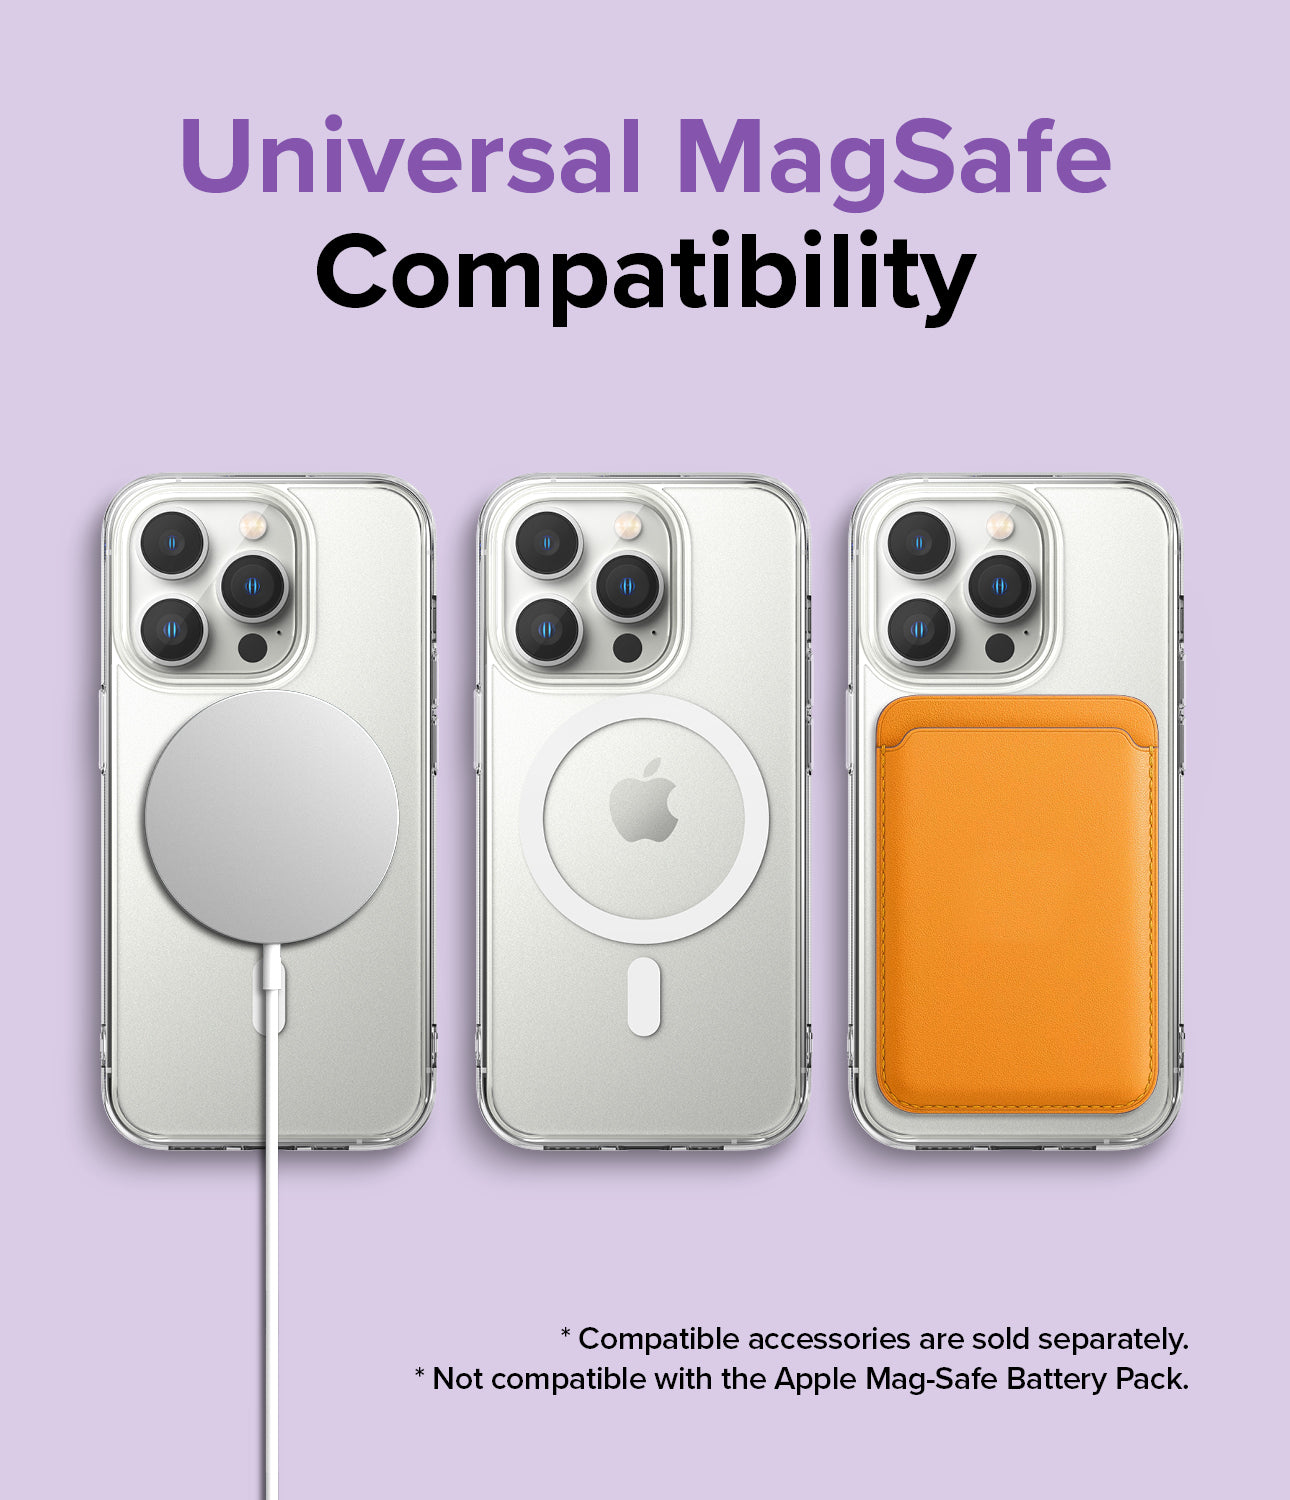 Universal MagSafe Compatibility * Compatible accessories are sold separately. * Not compatible with the Apple Mag-Safe Battery Pack.